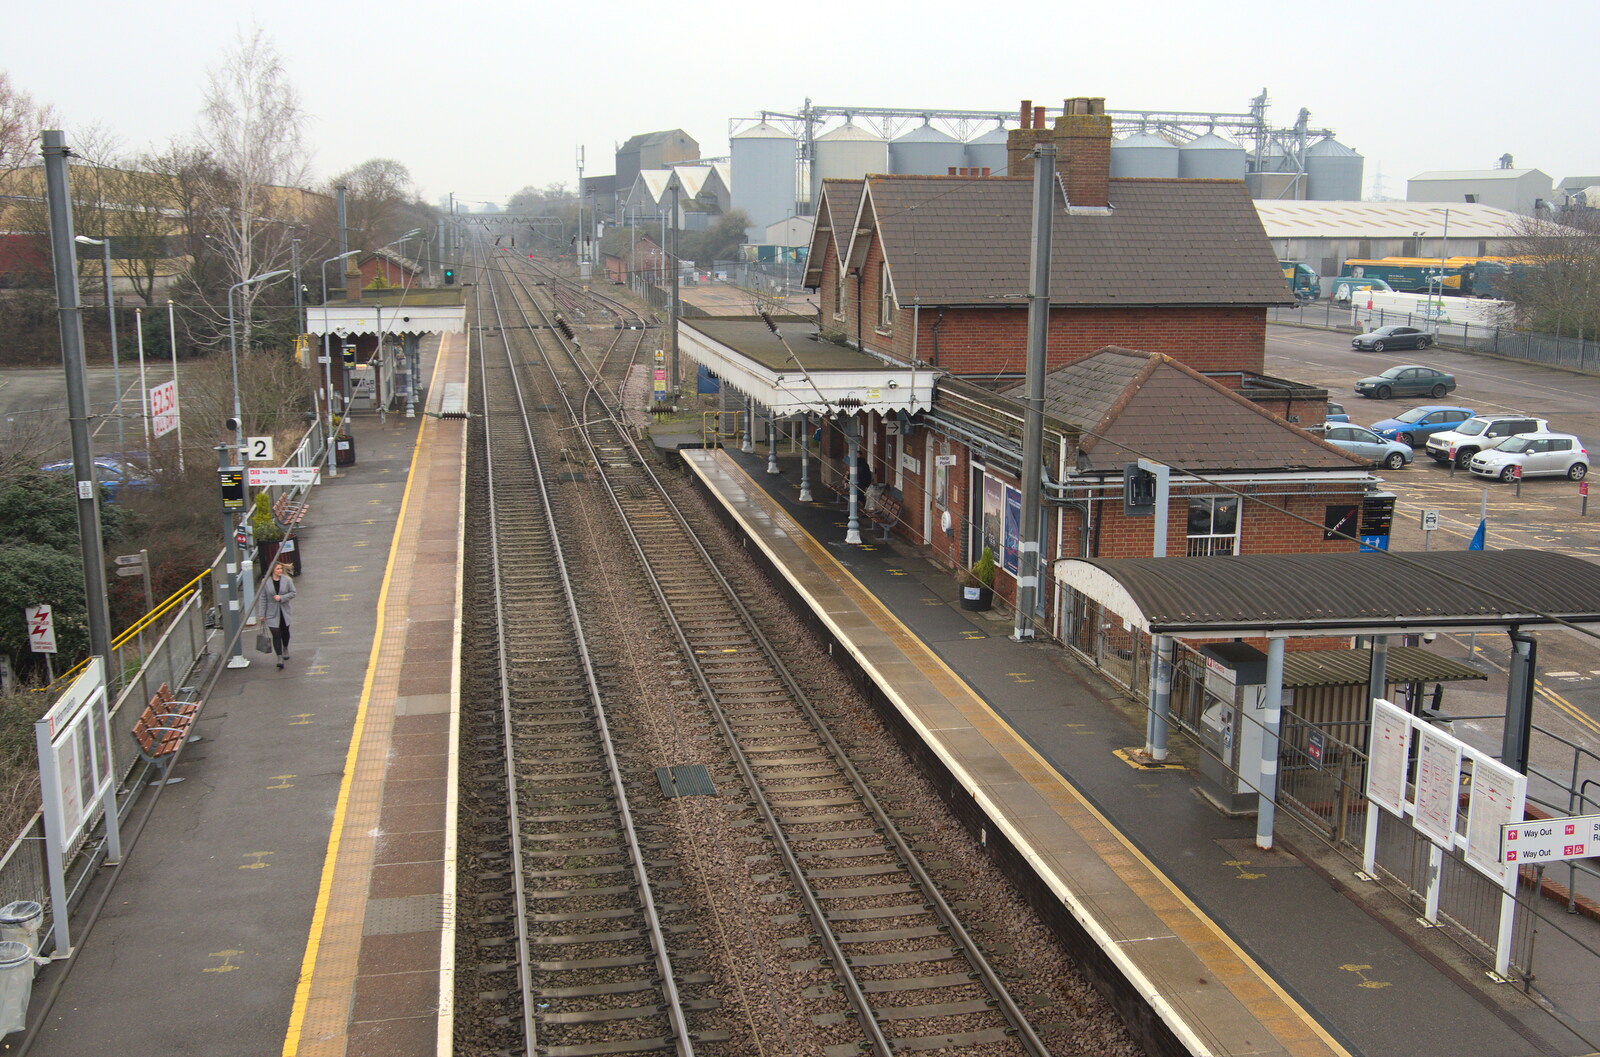 Diss railway station from A Trip to the Natural History Museum, Kensington, London - 15th January 2022